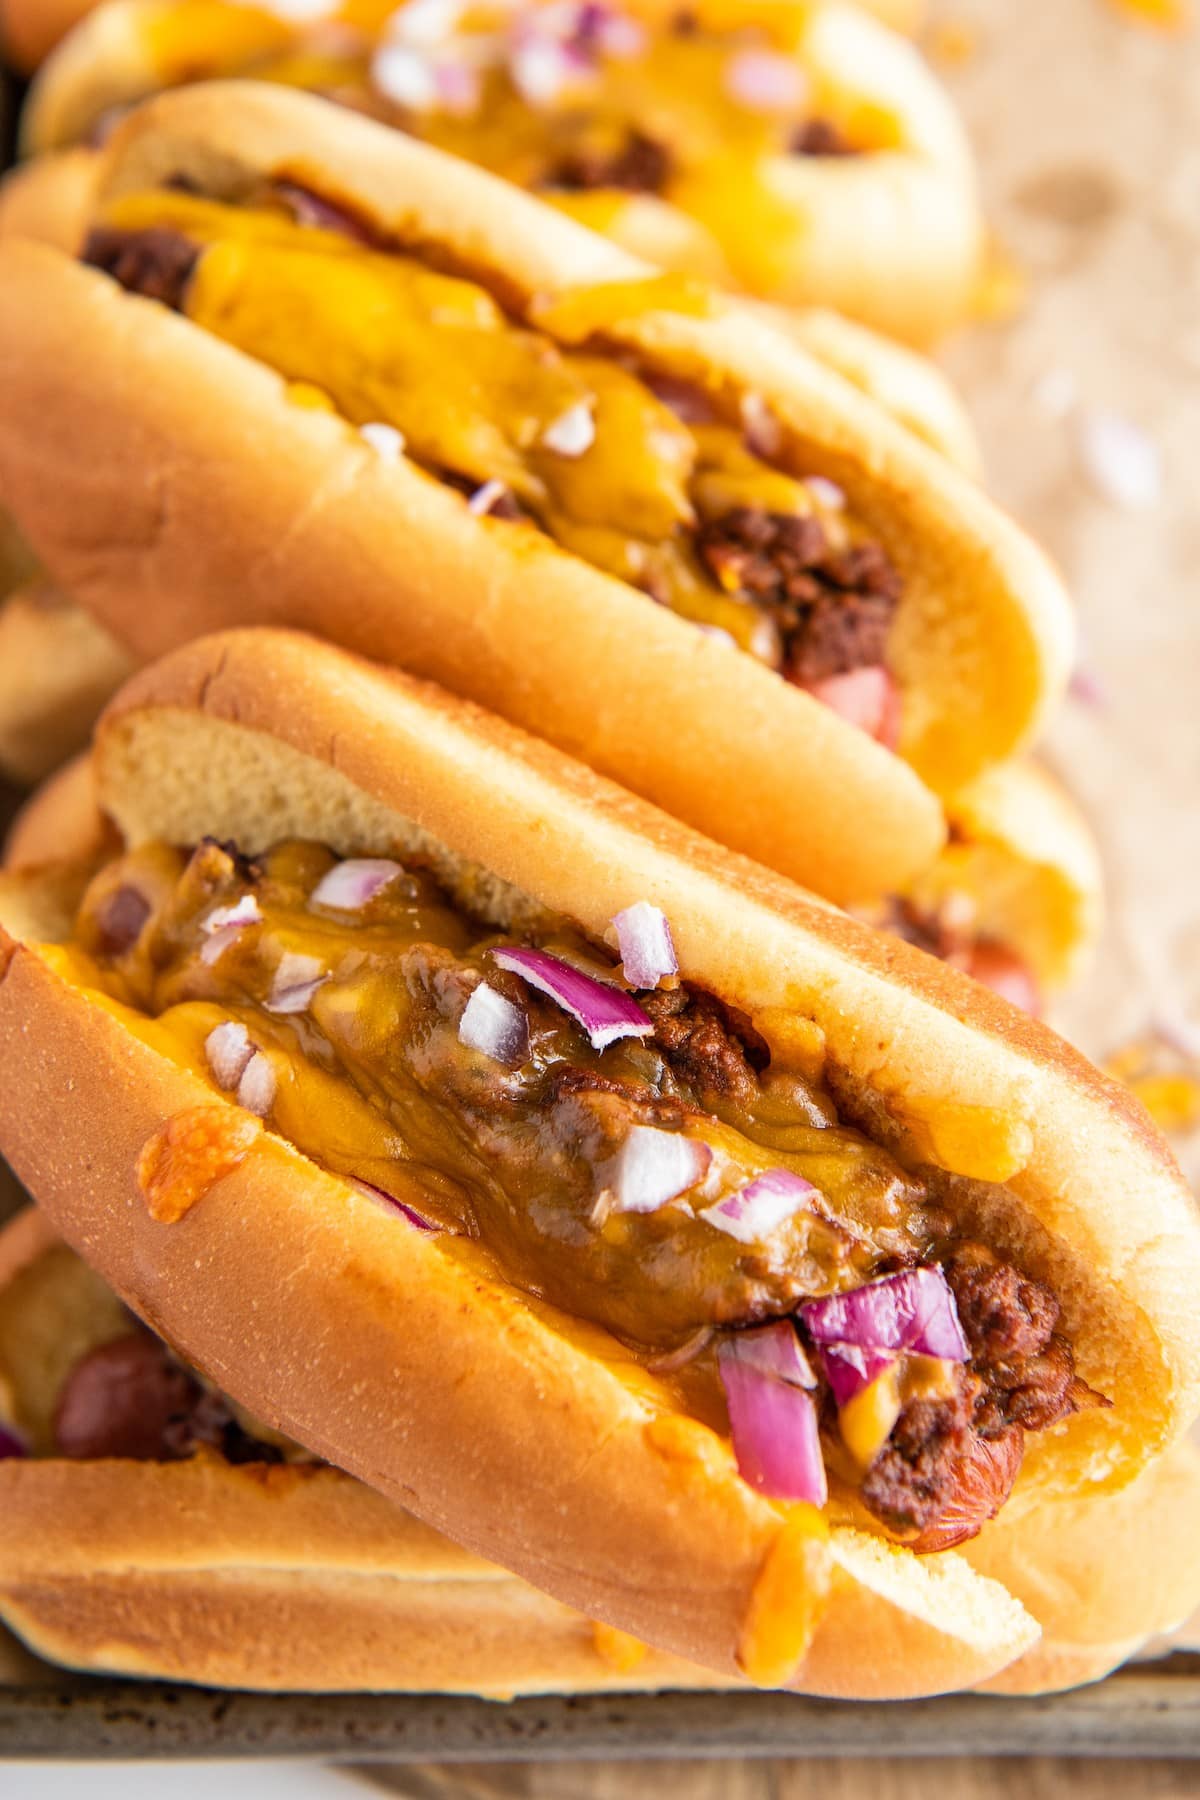 Chili cheese dogs sprinkled with chopped red onion.